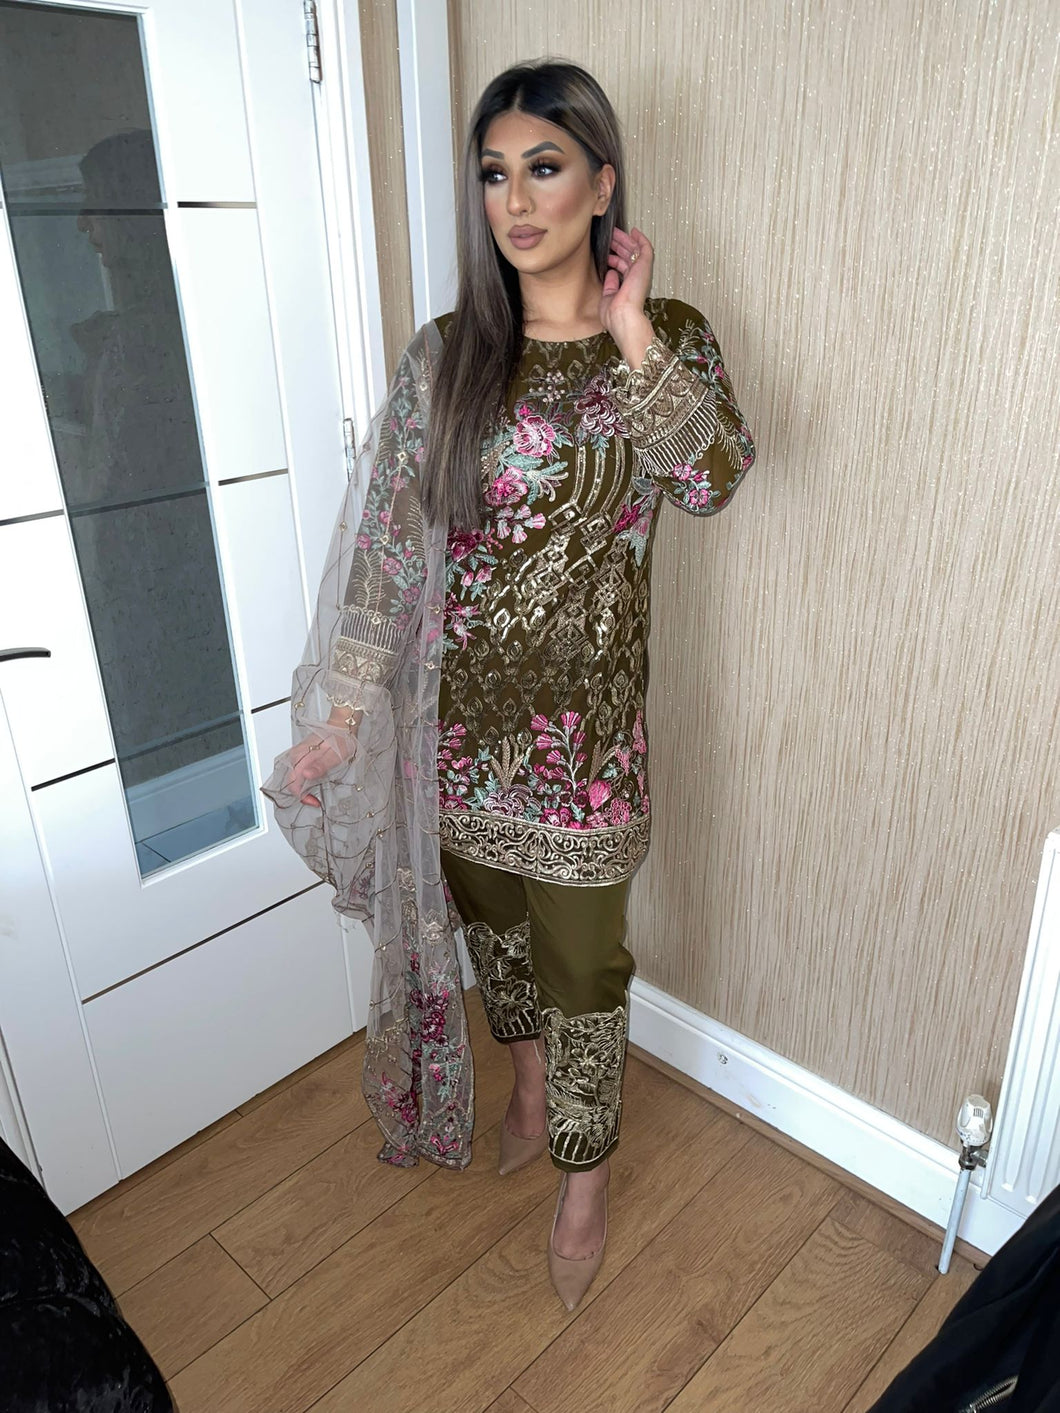 3pc OLIVE Embroidered Shalwar Kameez with Organza Dupatta Stitched Suit Ready to wear HW-UQOLIVE